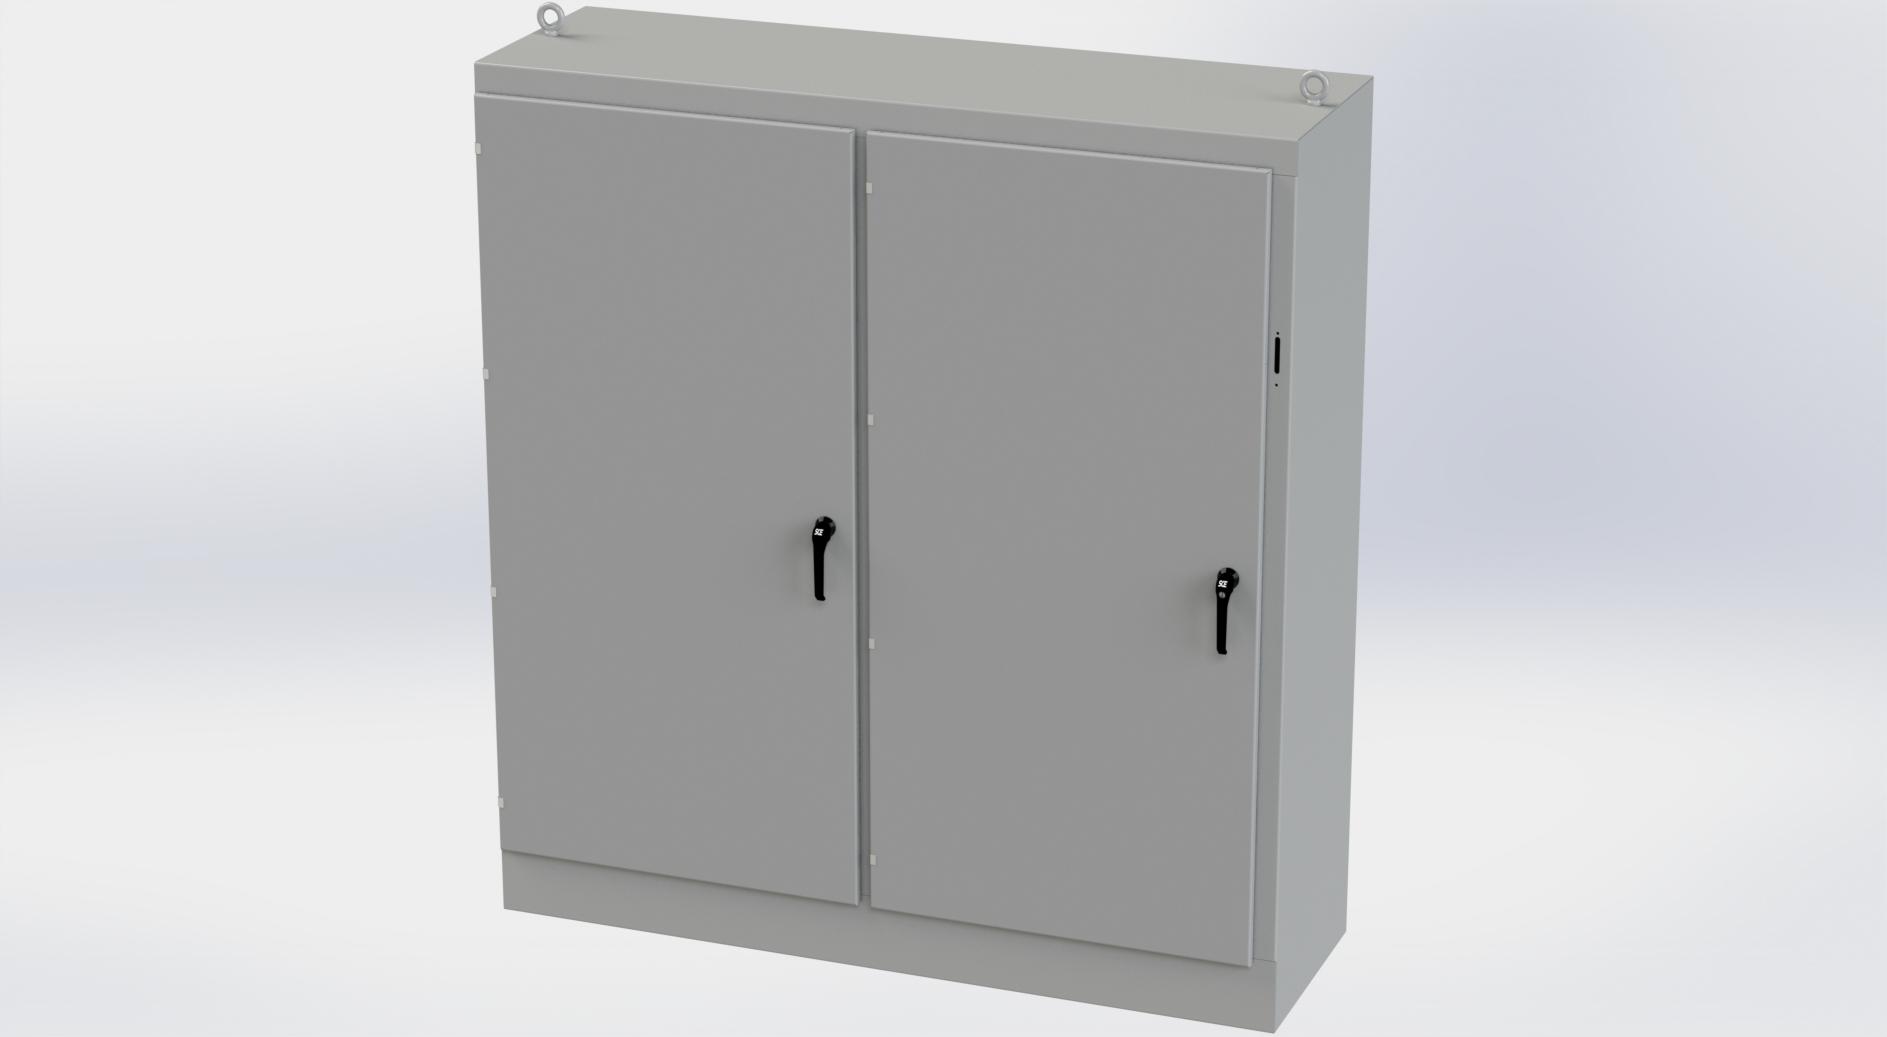 Saginaw Control SCE-84XM7824G 2DR XM Enclosure, Height:84.00", Width:77.75", Depth:24.00", ANSI-61 gray powder coating inside and out. Sub-panels are powder coated white.